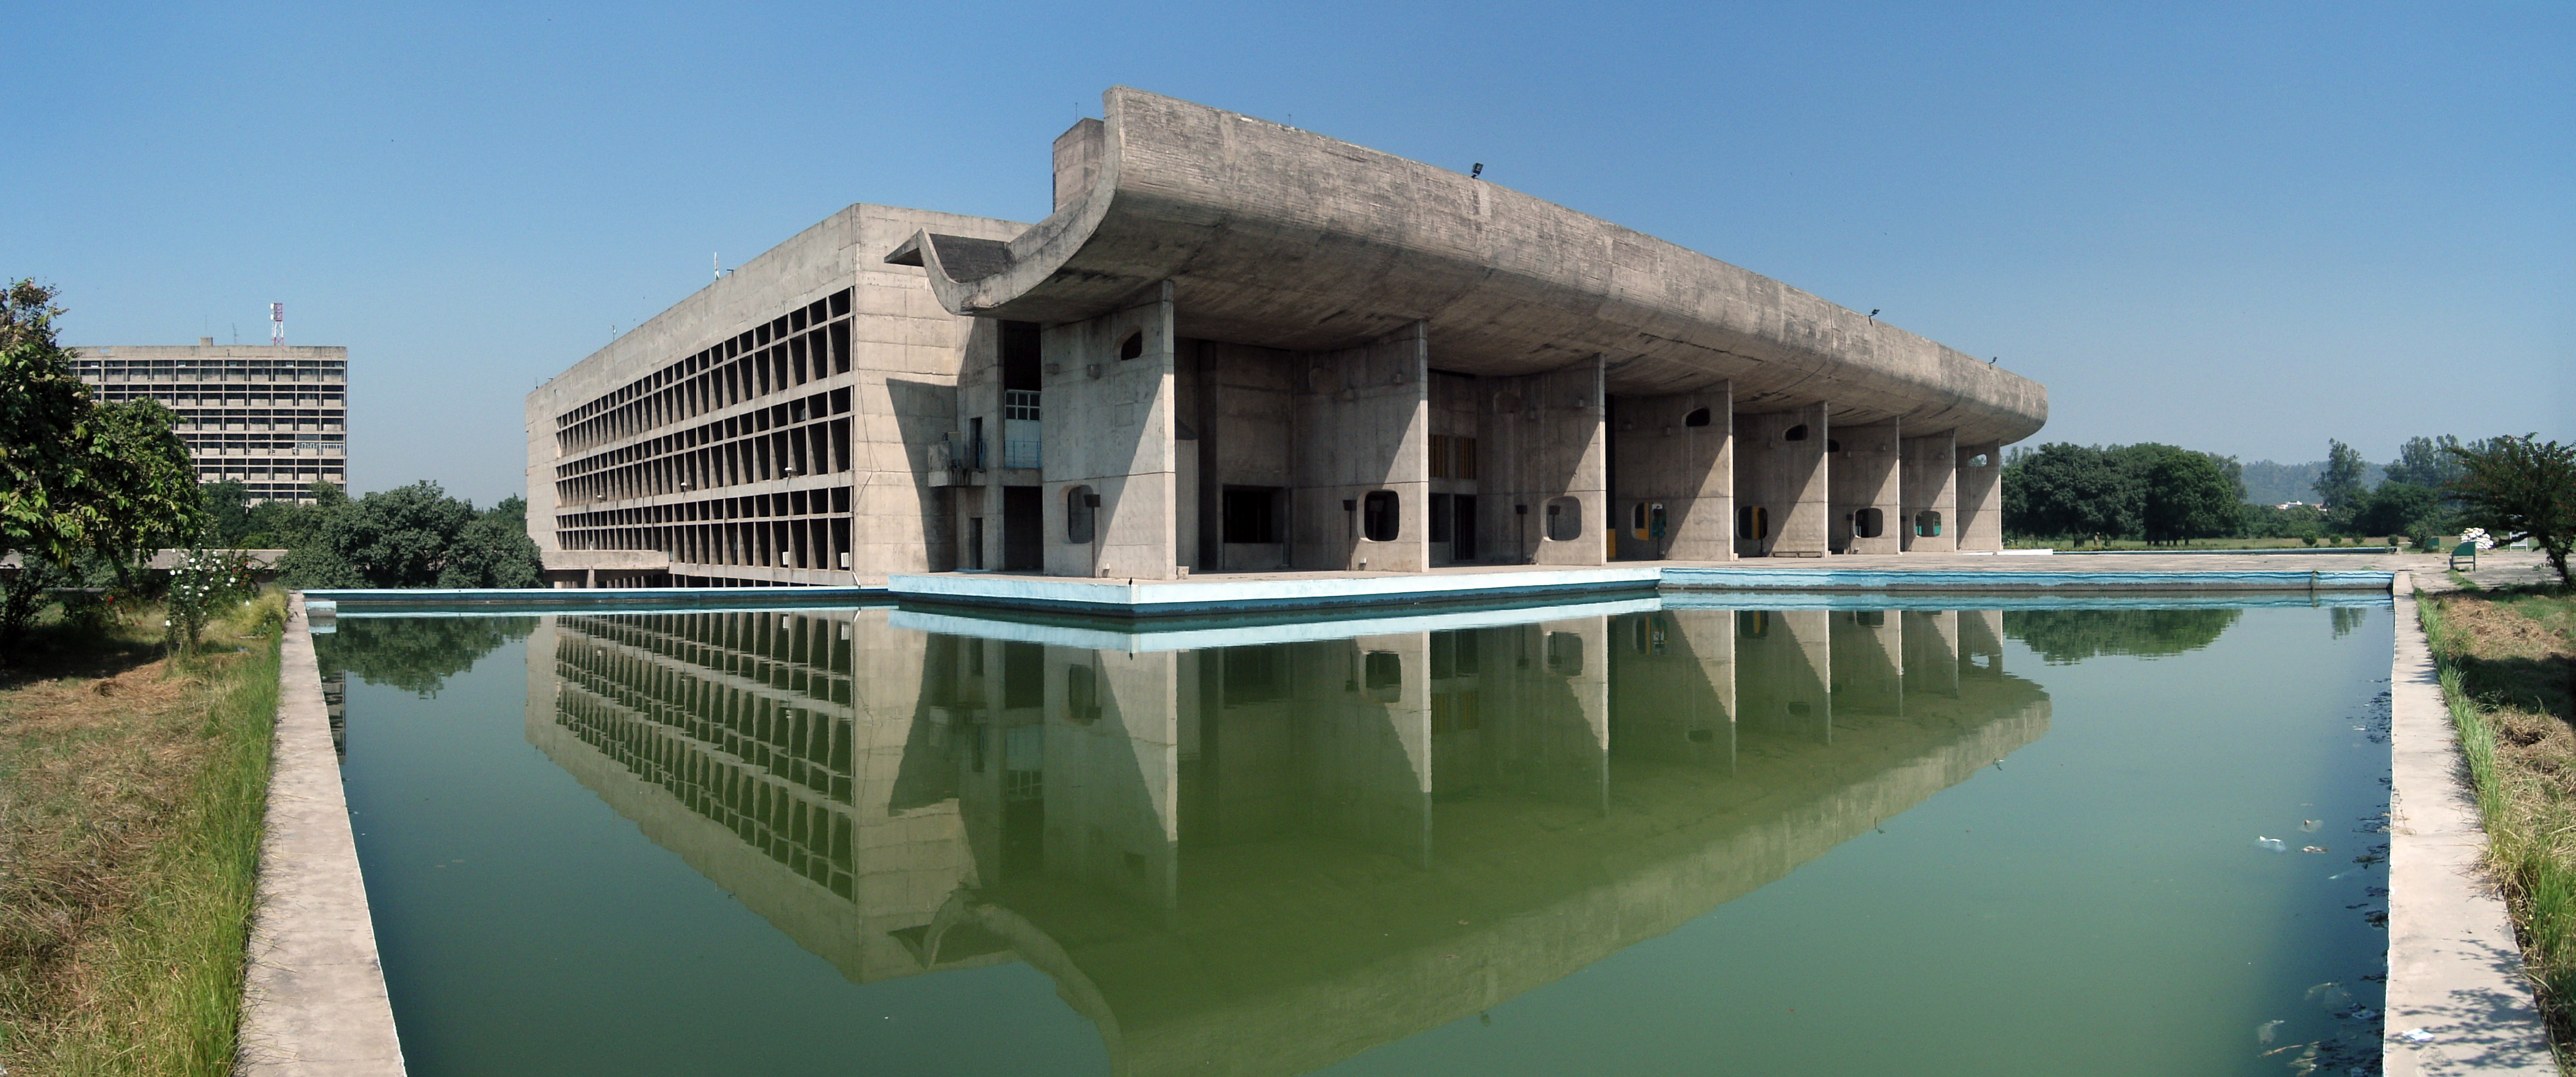 The Palace of Assembly in Chandigarh, India designed by Le Corbusier. Completed in 1962.